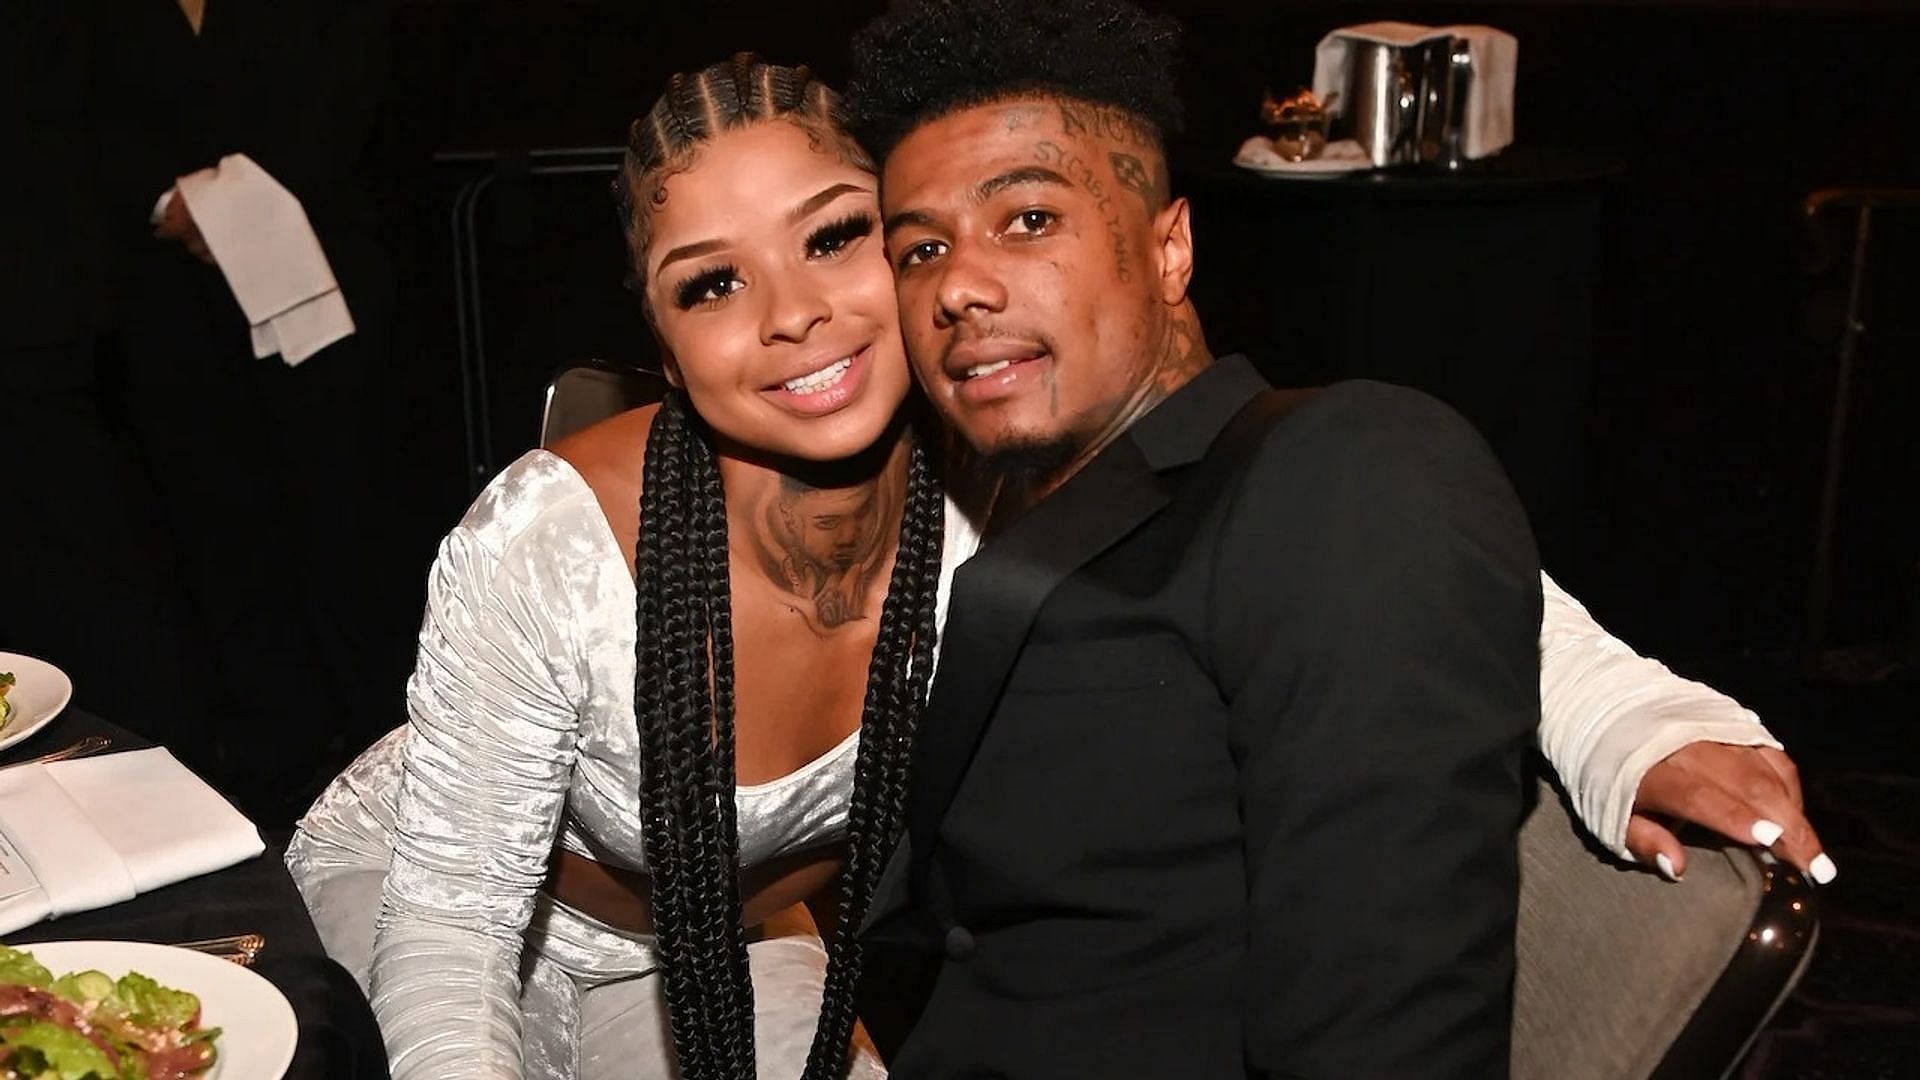 I thought you was done”: Chrisean Rock Blueface breakup drama explained as former announces reunion with rapper, leaving netizens enraged